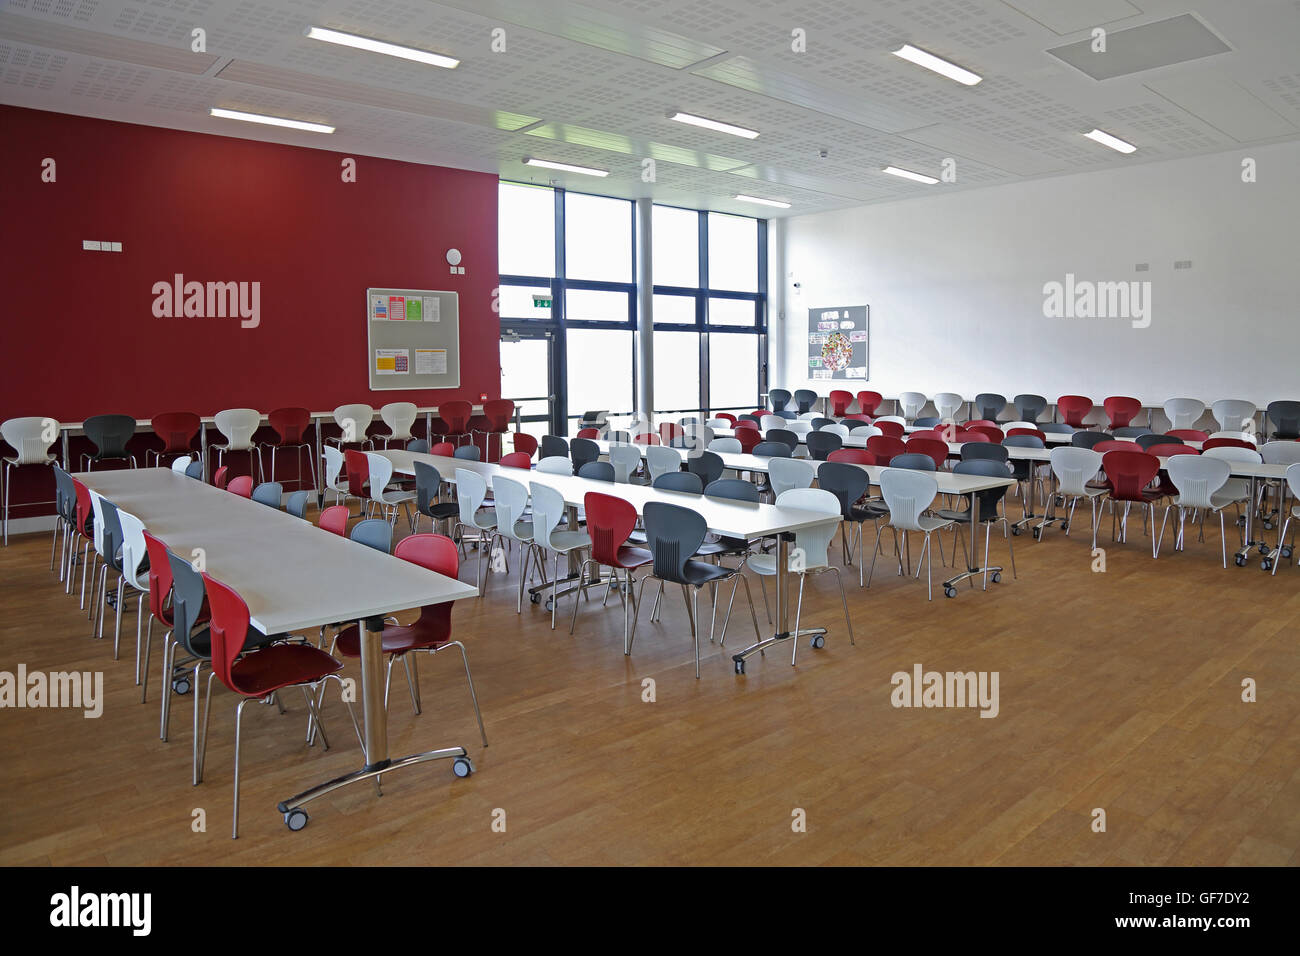 Interior view of a new school dining hall. Shows tables and chairs, no people. Stock Photo